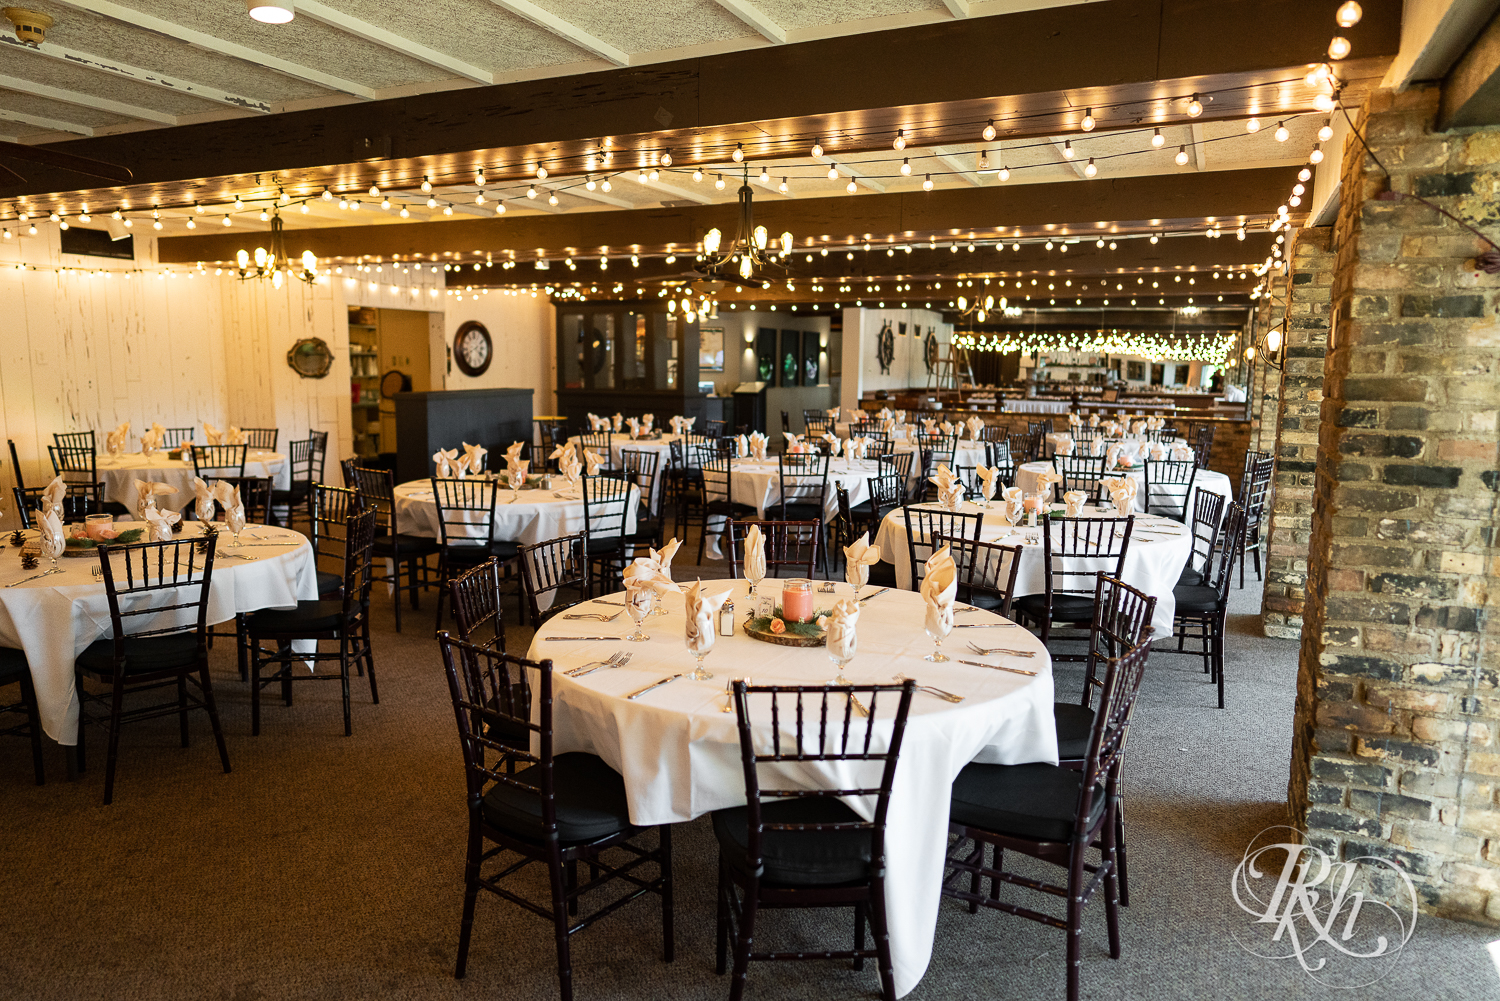 Wedding reception setup at The Chart House in Lakeville, Minnesota.